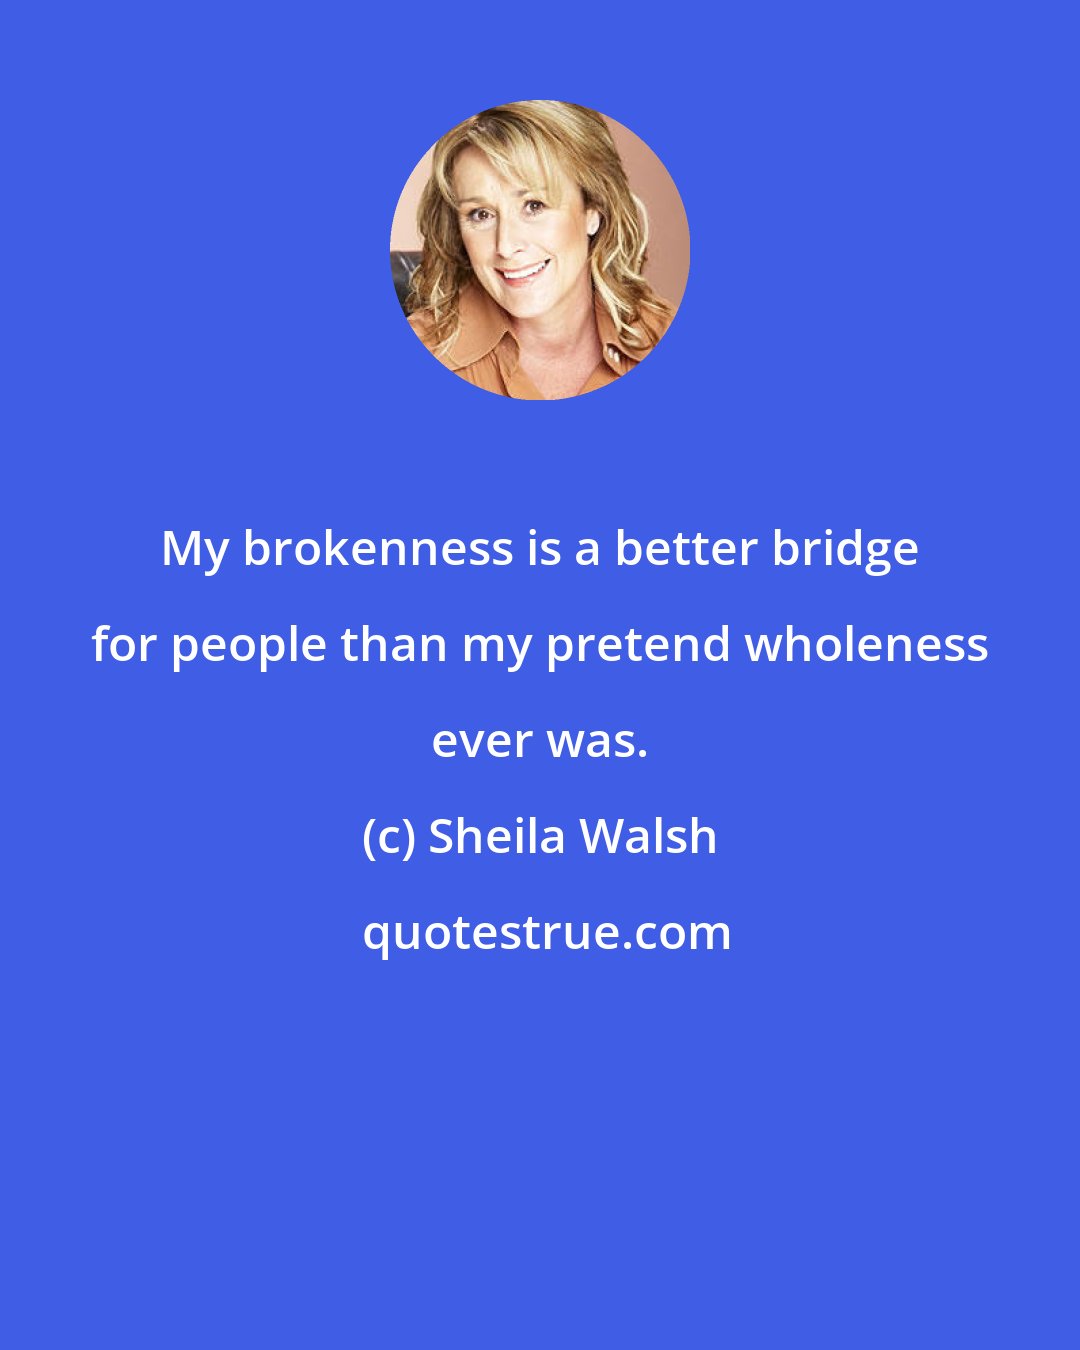 Sheila Walsh: My brokenness is a better bridge for people than my pretend wholeness ever was.